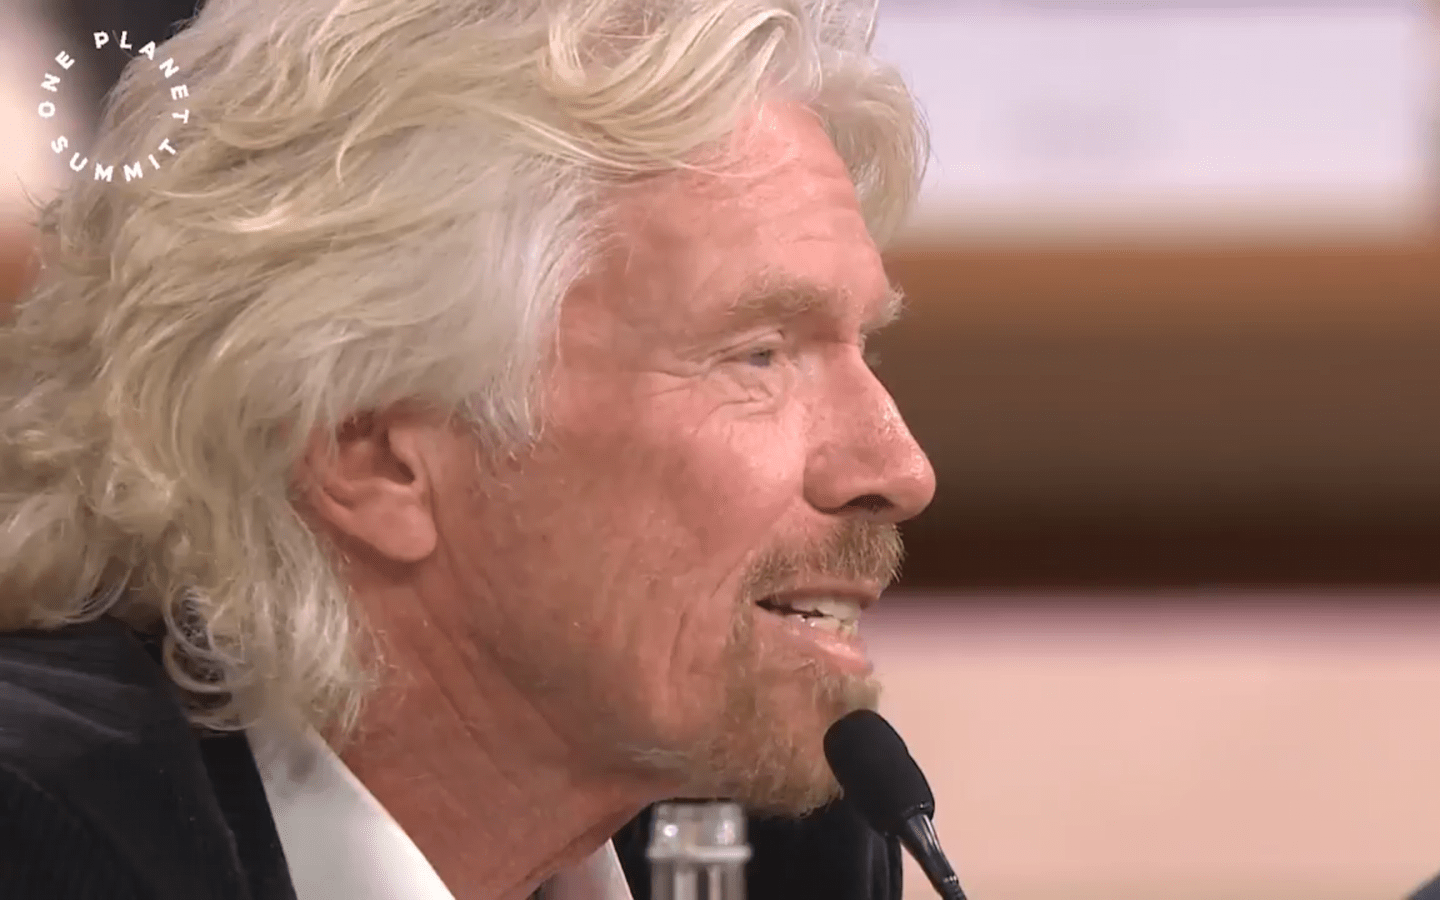 Richard Branson speaking into a microphone at the One Planet Summit